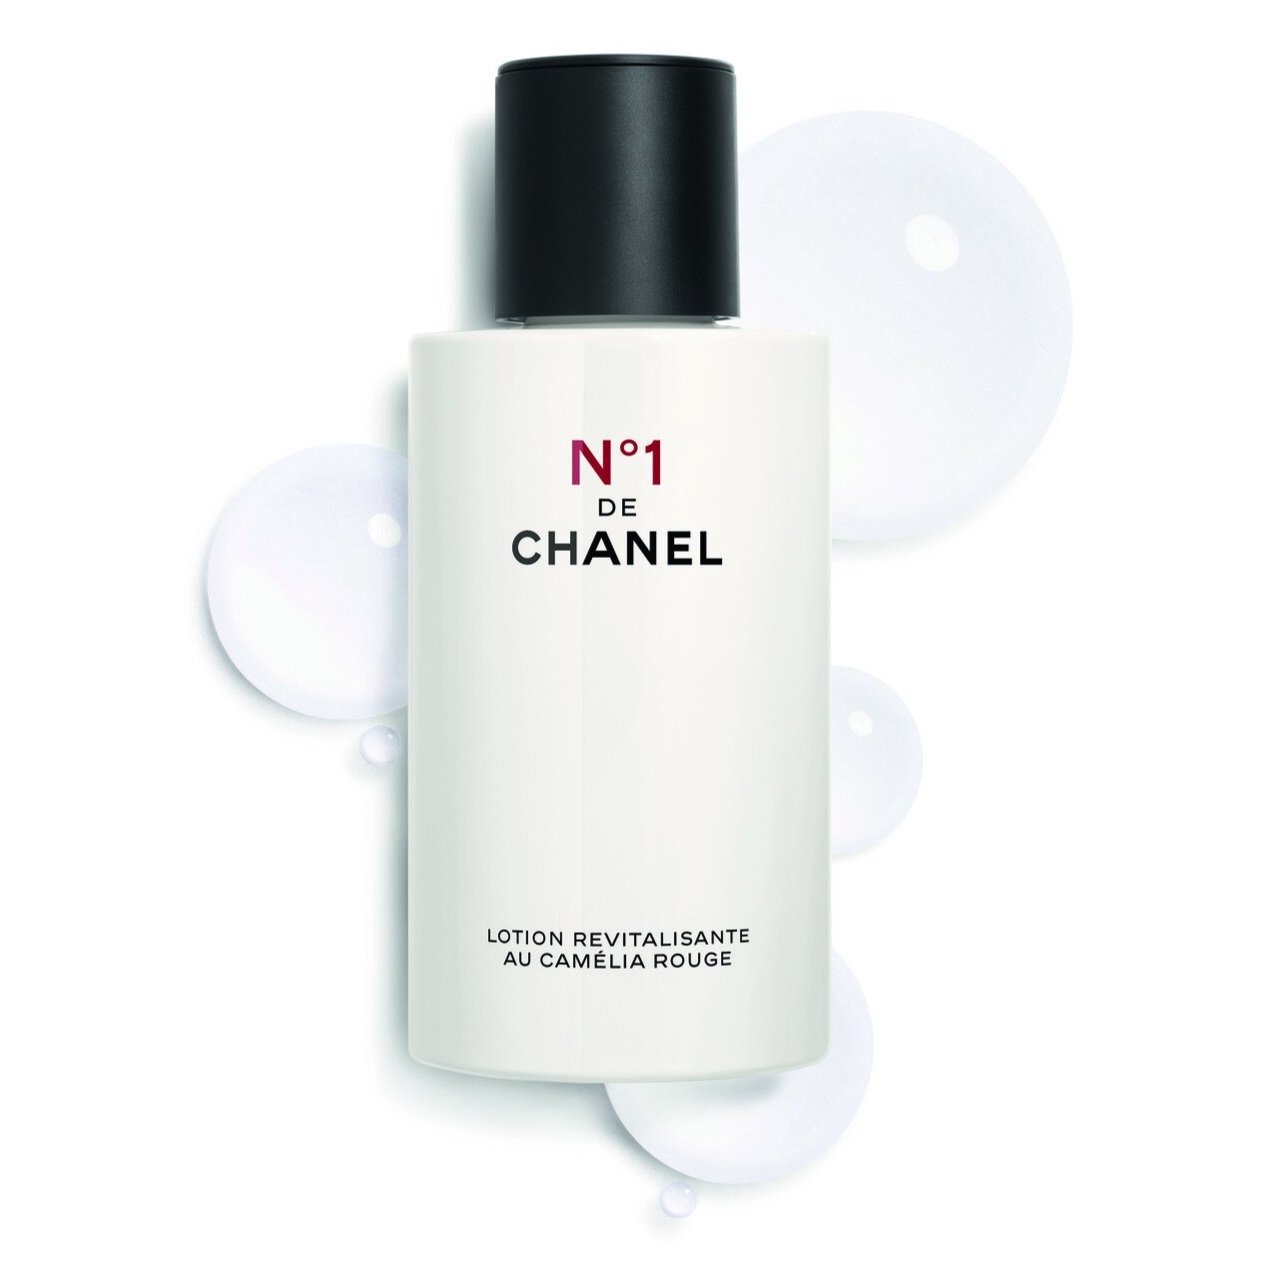 Chanel Launches First Refillable Beauty Products as Part of New